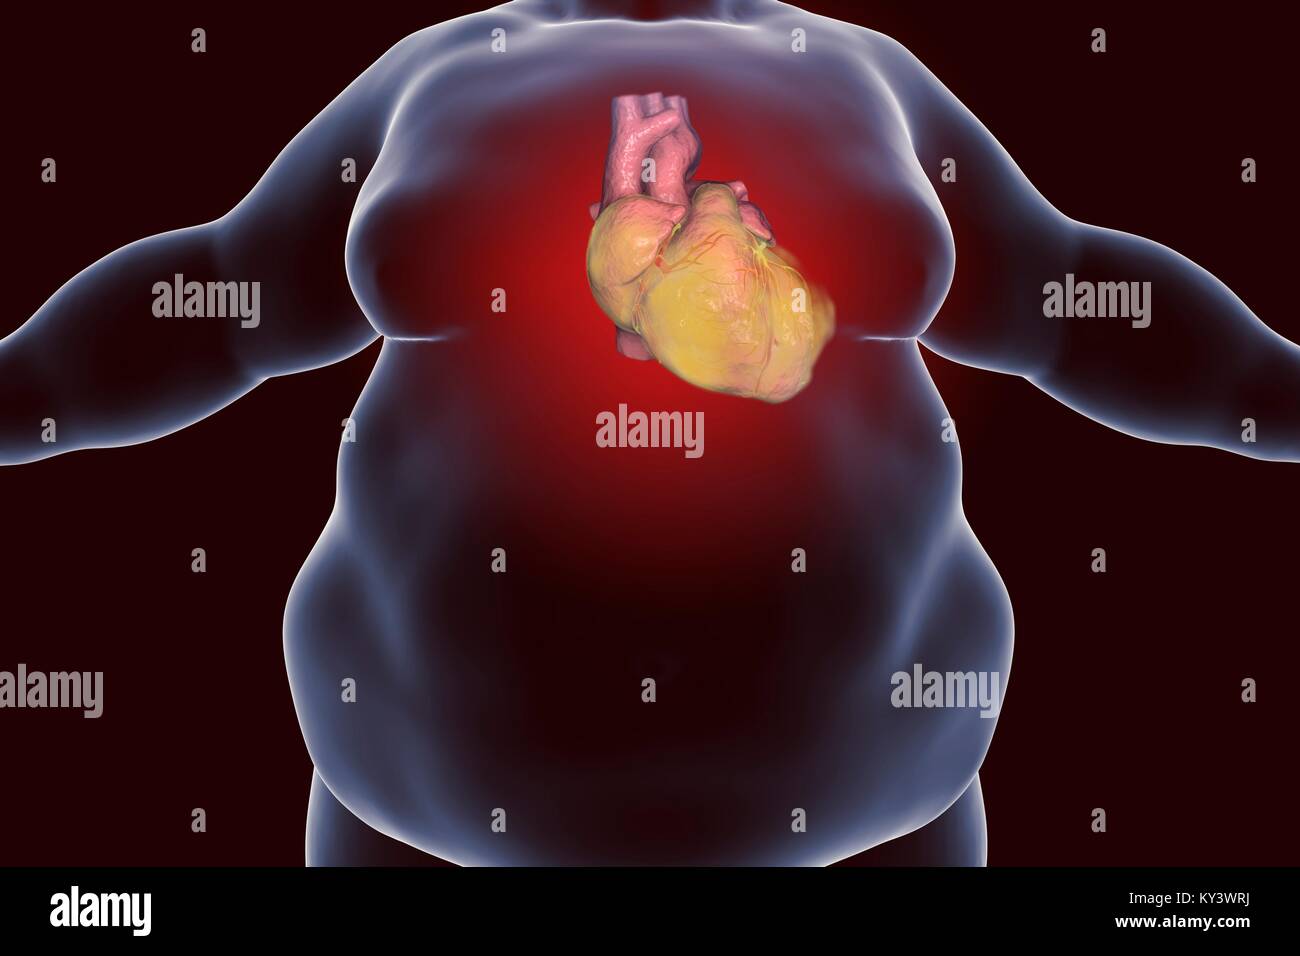 Computer illustration of a fatty heart in an overweight man. Stock Photo